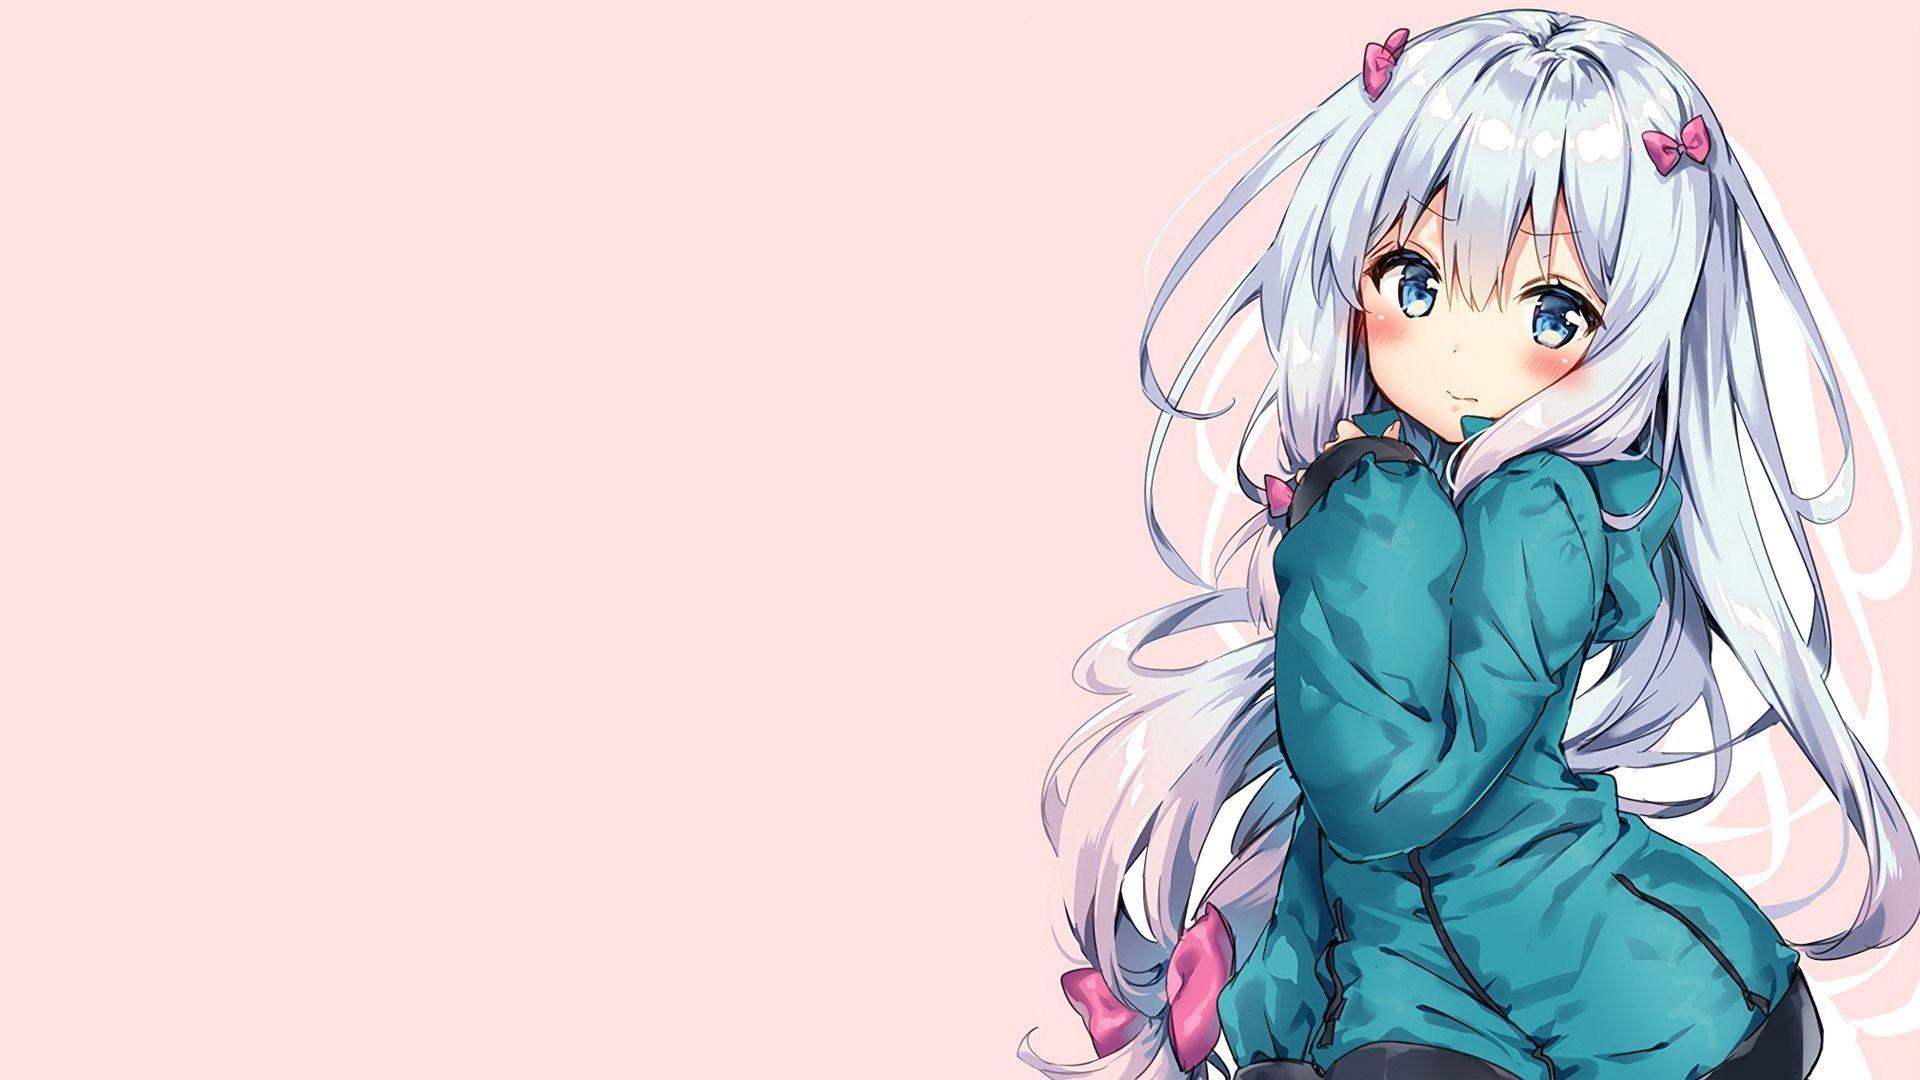 Cute Anime Girl Wallpapers - Wallpaper Cave